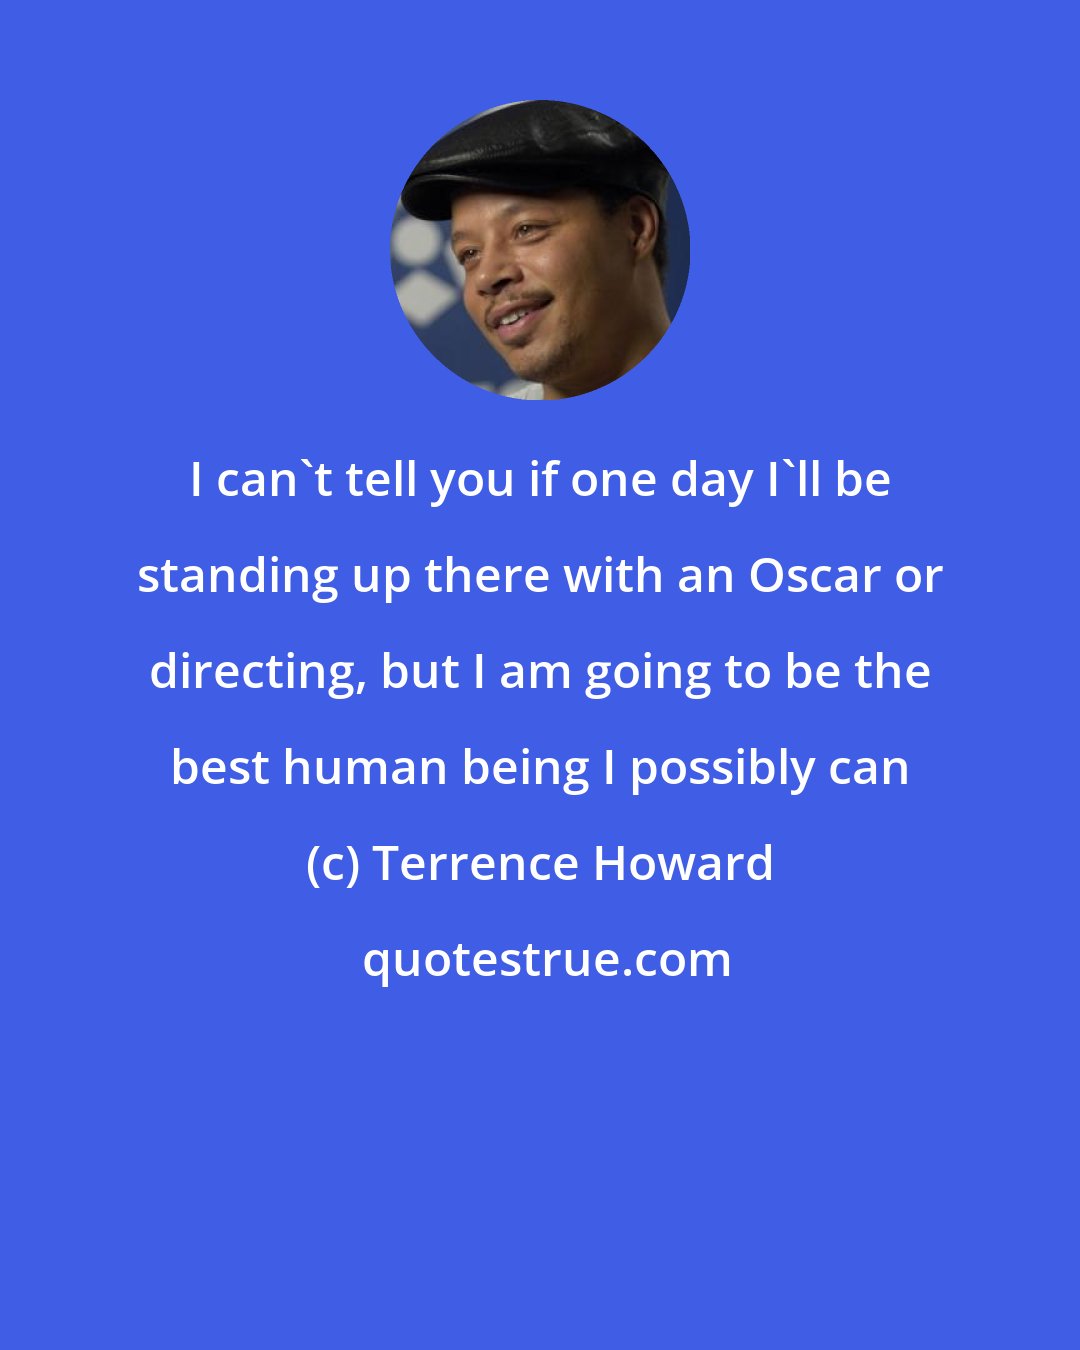 Terrence Howard: I can't tell you if one day I'll be standing up there with an Oscar or directing, but I am going to be the best human being I possibly can